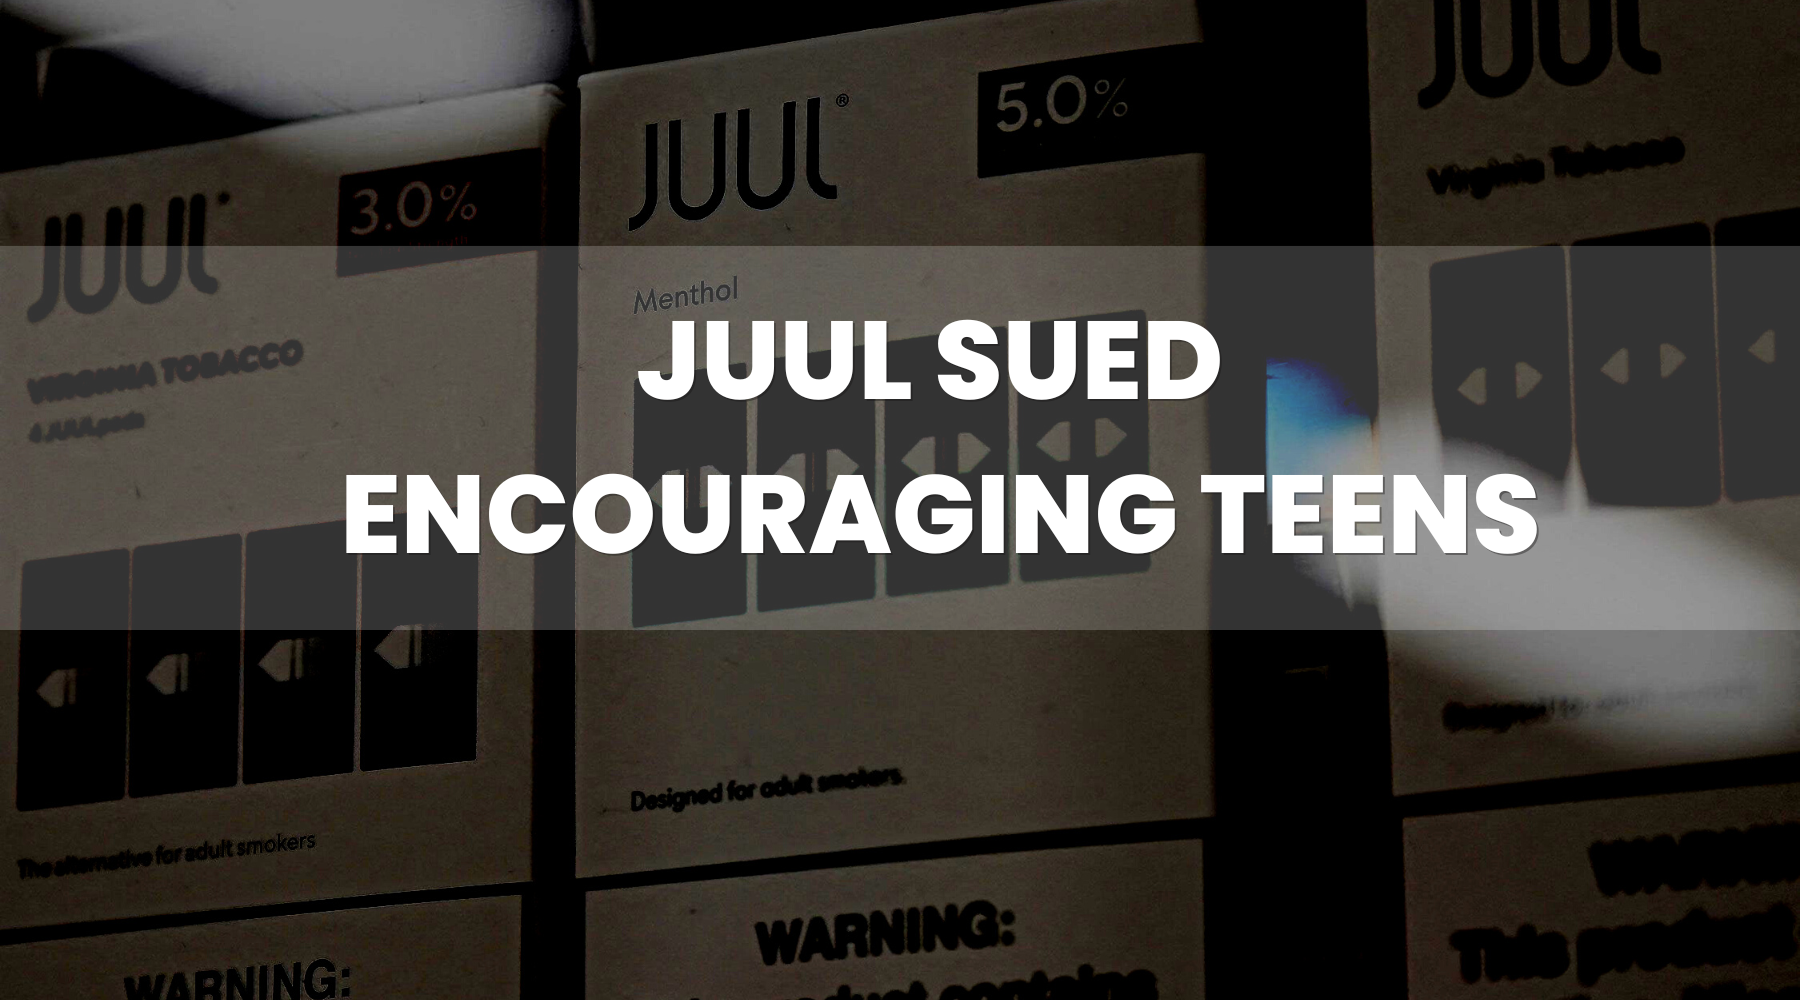 JUUL Sued for Encouraging Teens to Vape in the US